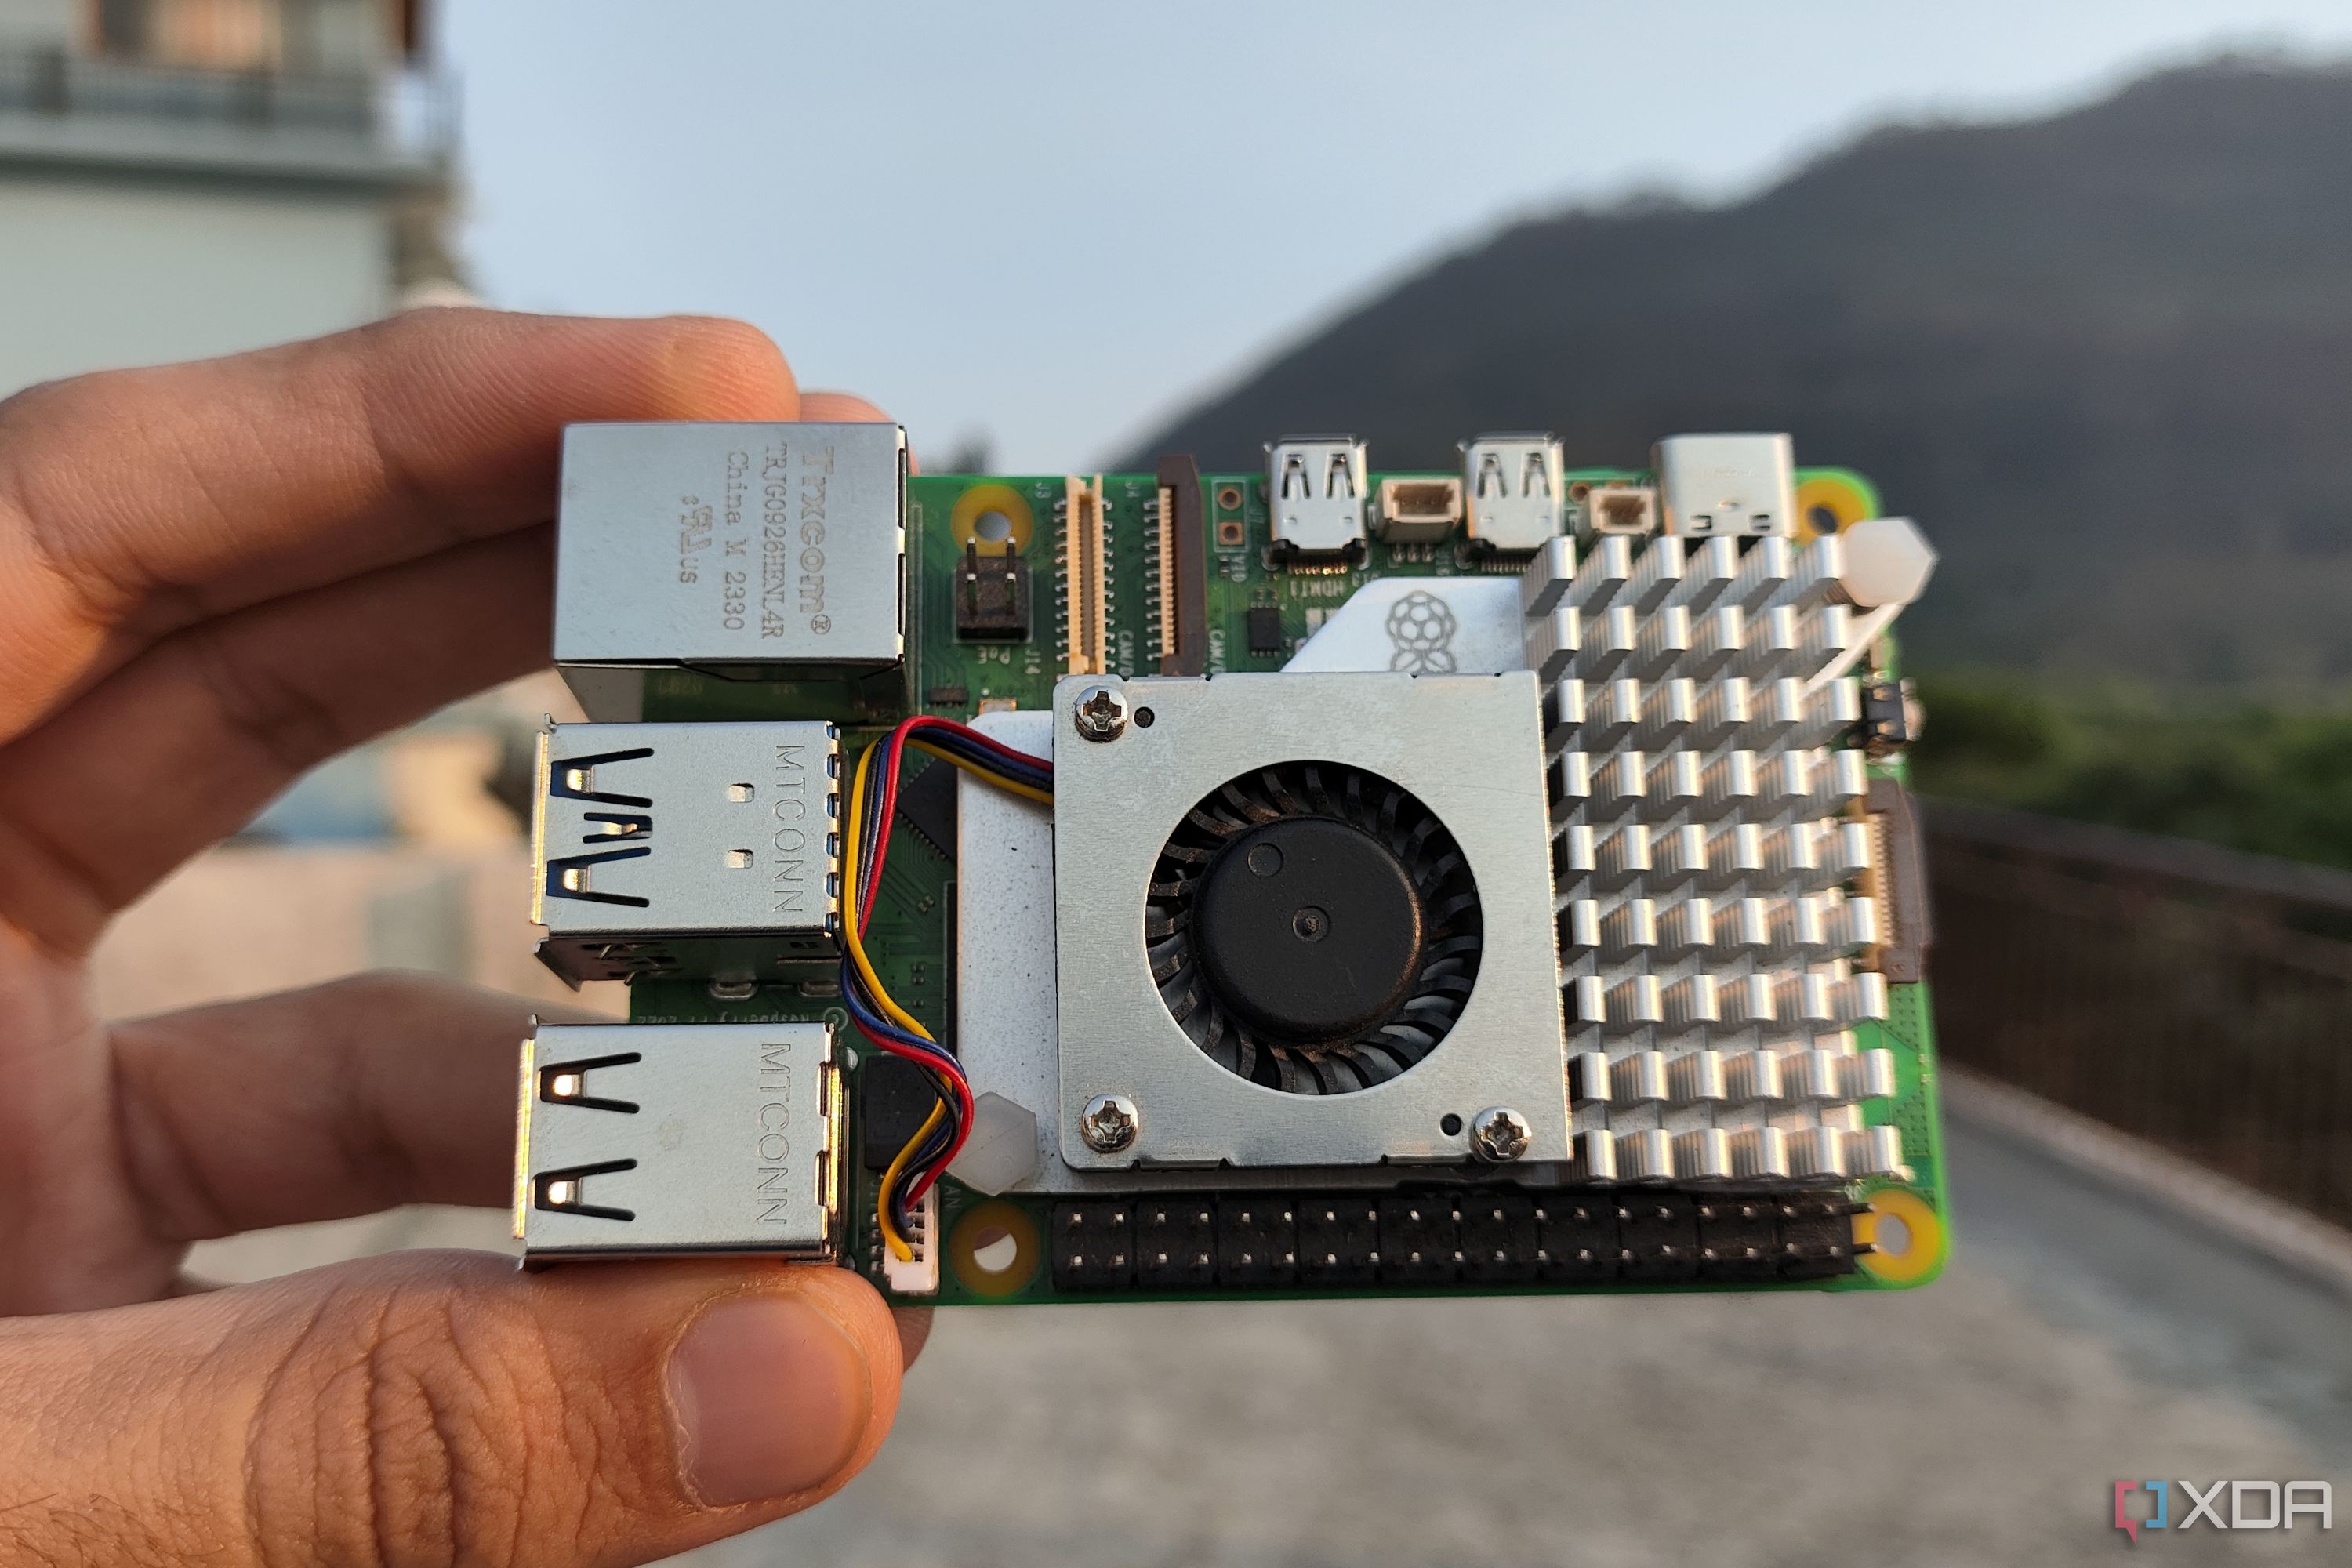 An image of the Raspberry Pi 5